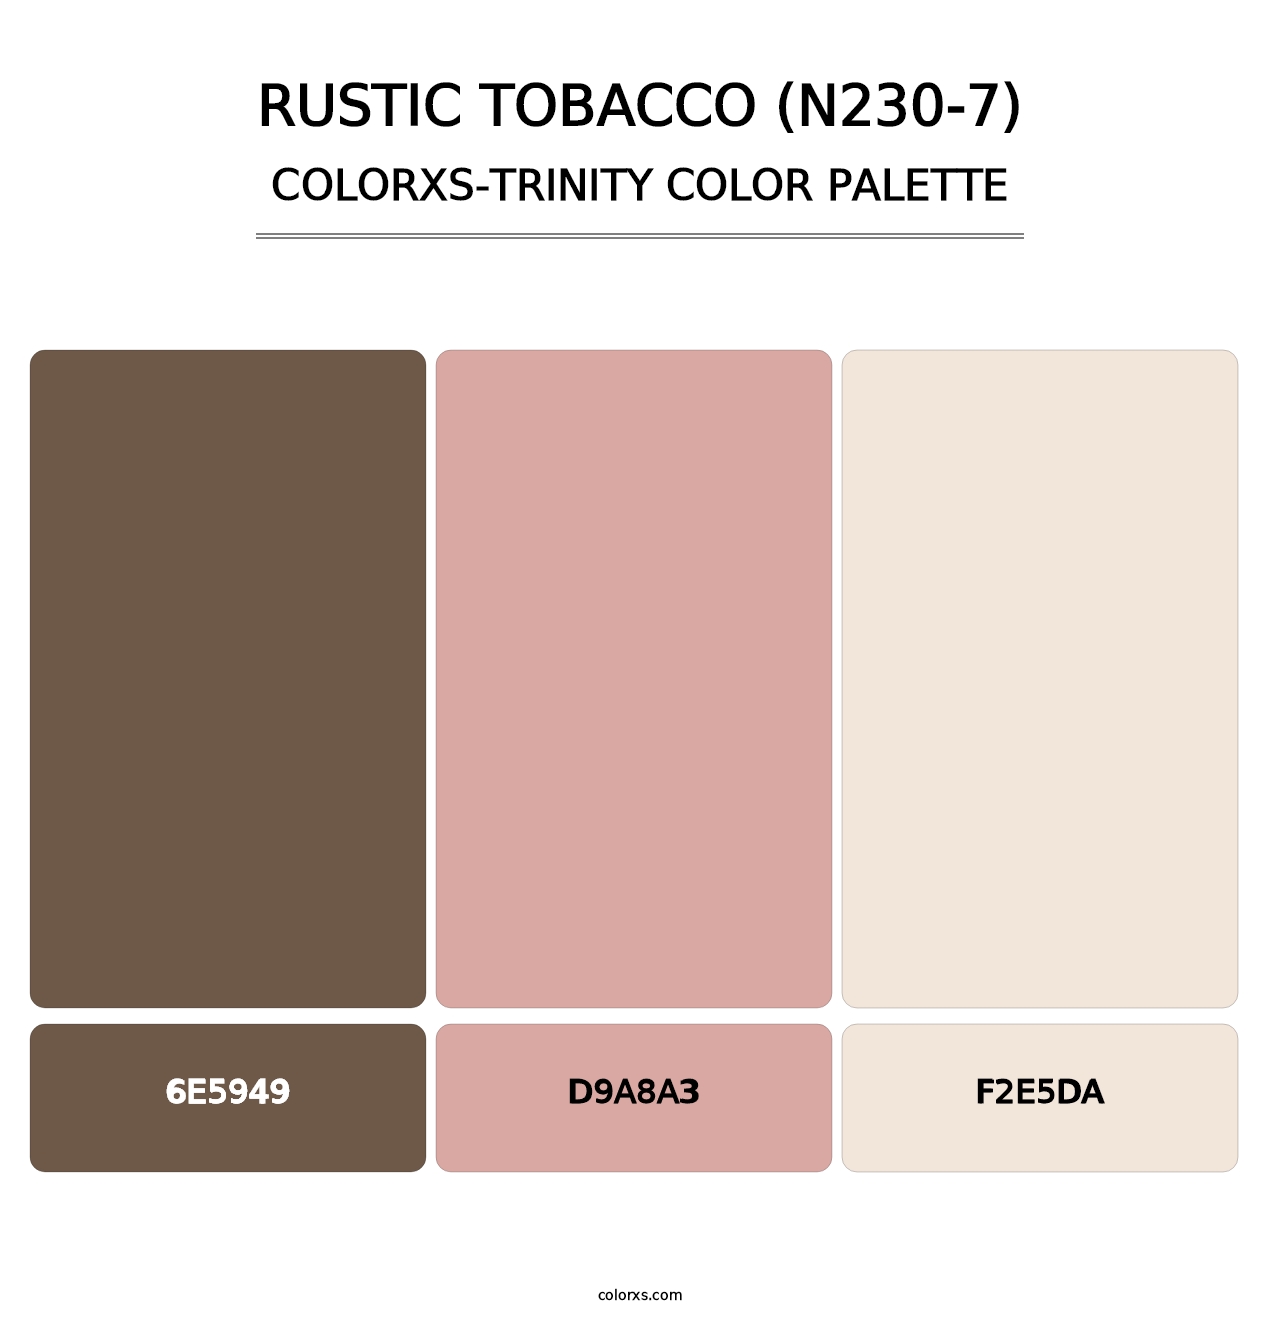 Rustic Tobacco (N230-7) - Colorxs Trinity Palette